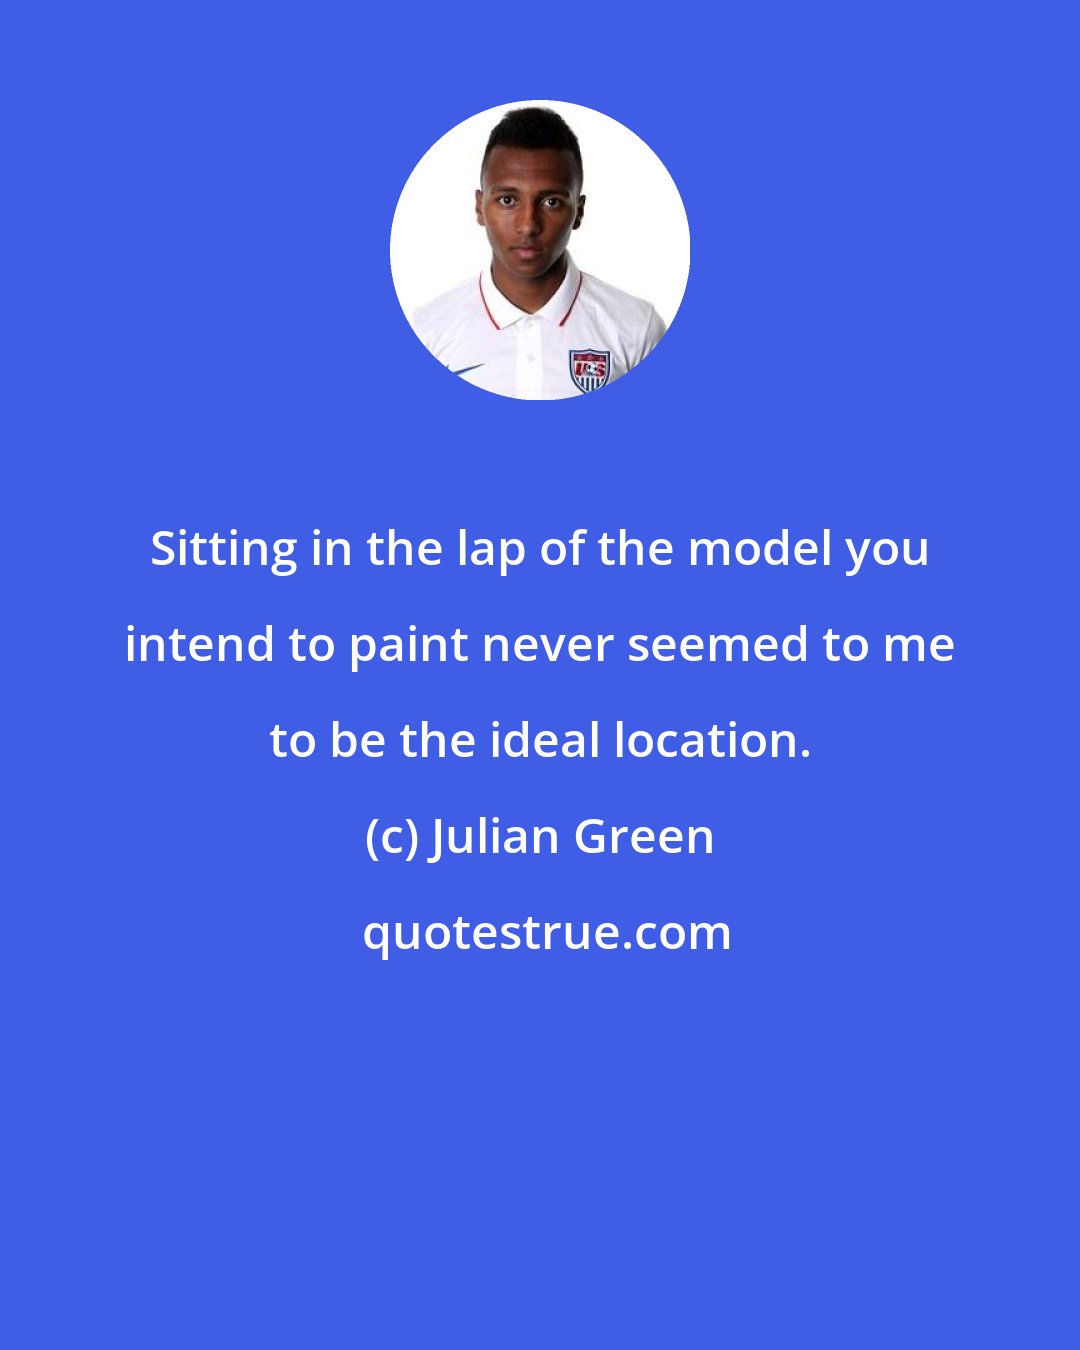 Julian Green: Sitting in the lap of the model you intend to paint never seemed to me to be the ideal location.